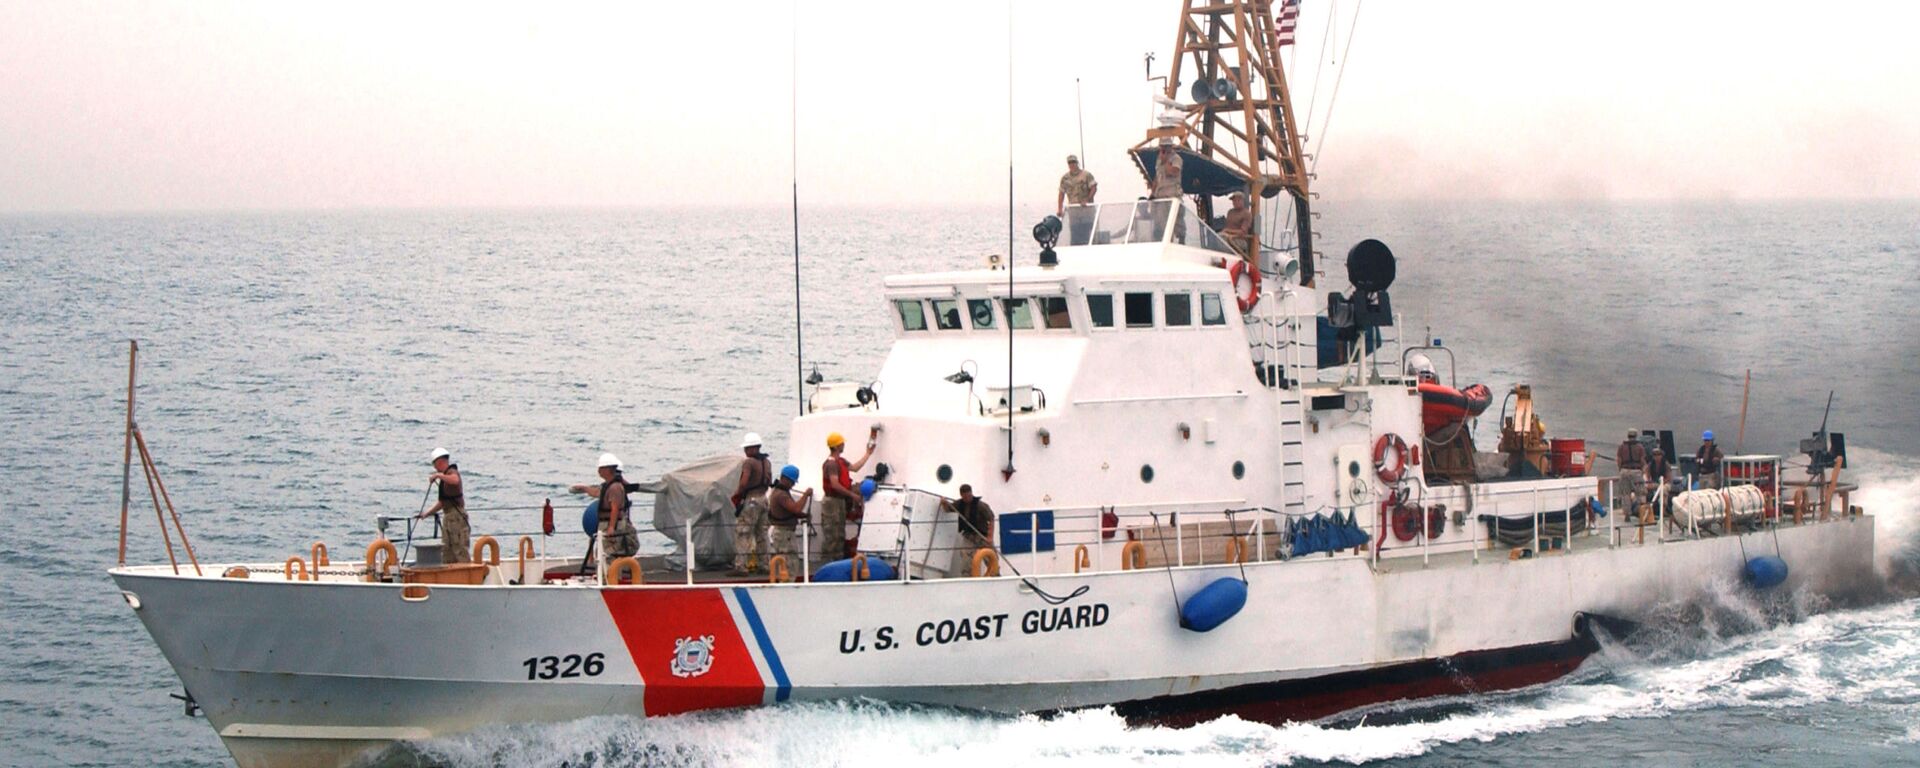 Coast Guardsmen aboard U.S Coast Guard Cutter Monomoy (WPB 1326) wave good-bye to the guided missile cruiser USS Antietam (CG 74) after the first underway fuel replenishment (UNREP) between a U.S. Navy cruiser and a U.S. Coast Guard Cutter. - Sputnik International, 1920, 26.04.2021